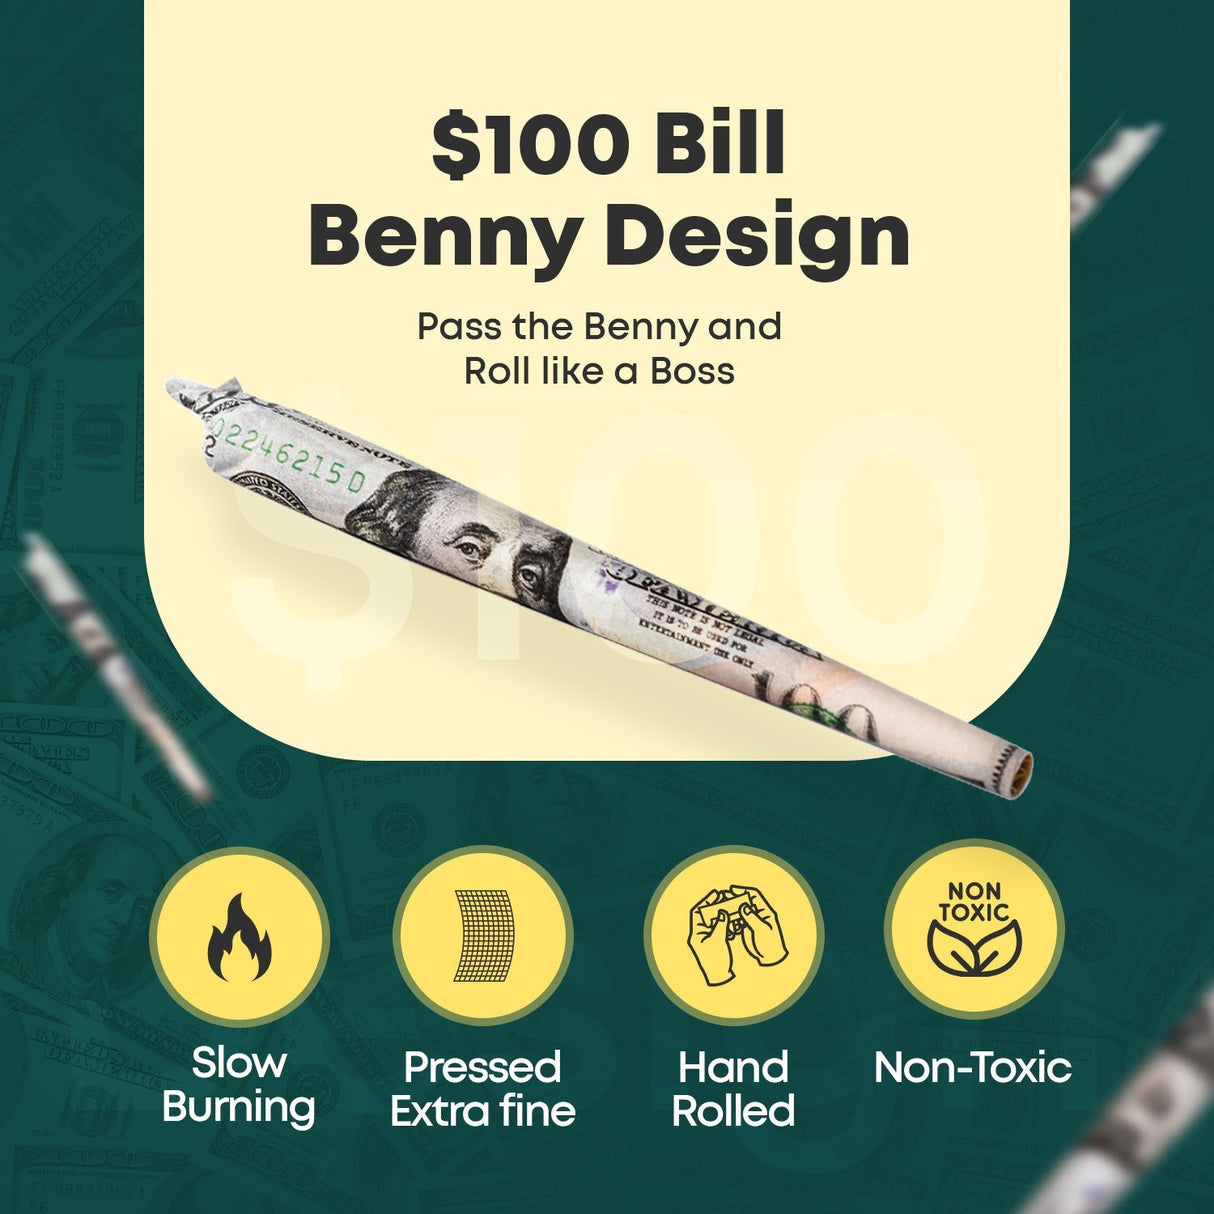 BENNY LITE Papers by Empire Rolling with $100 Bill Design - Slow Burning & Non-Toxic